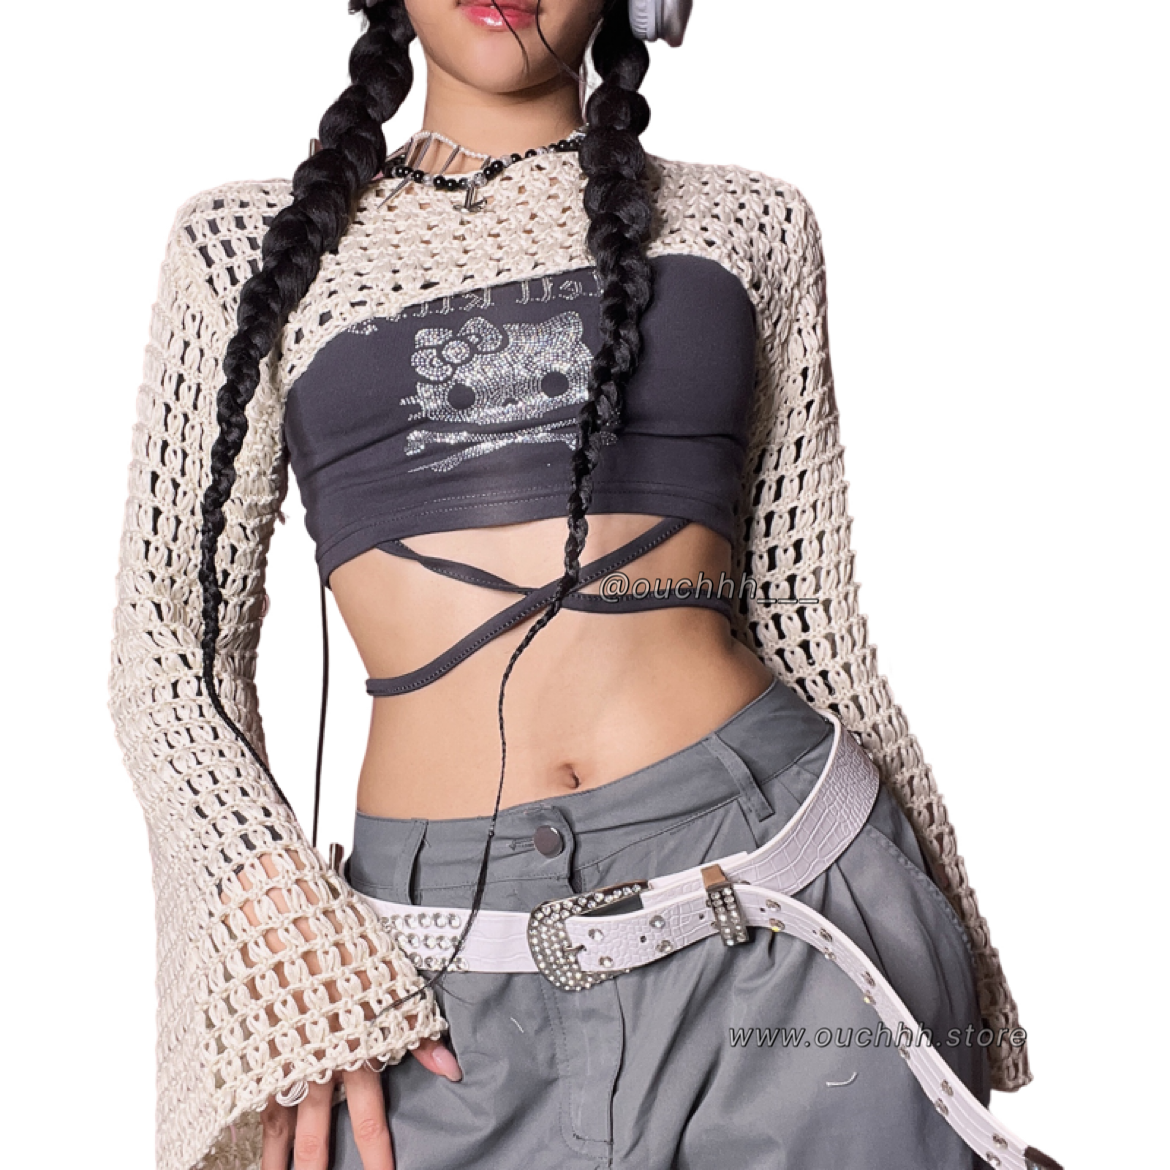 Crochet Extreme Cropped top